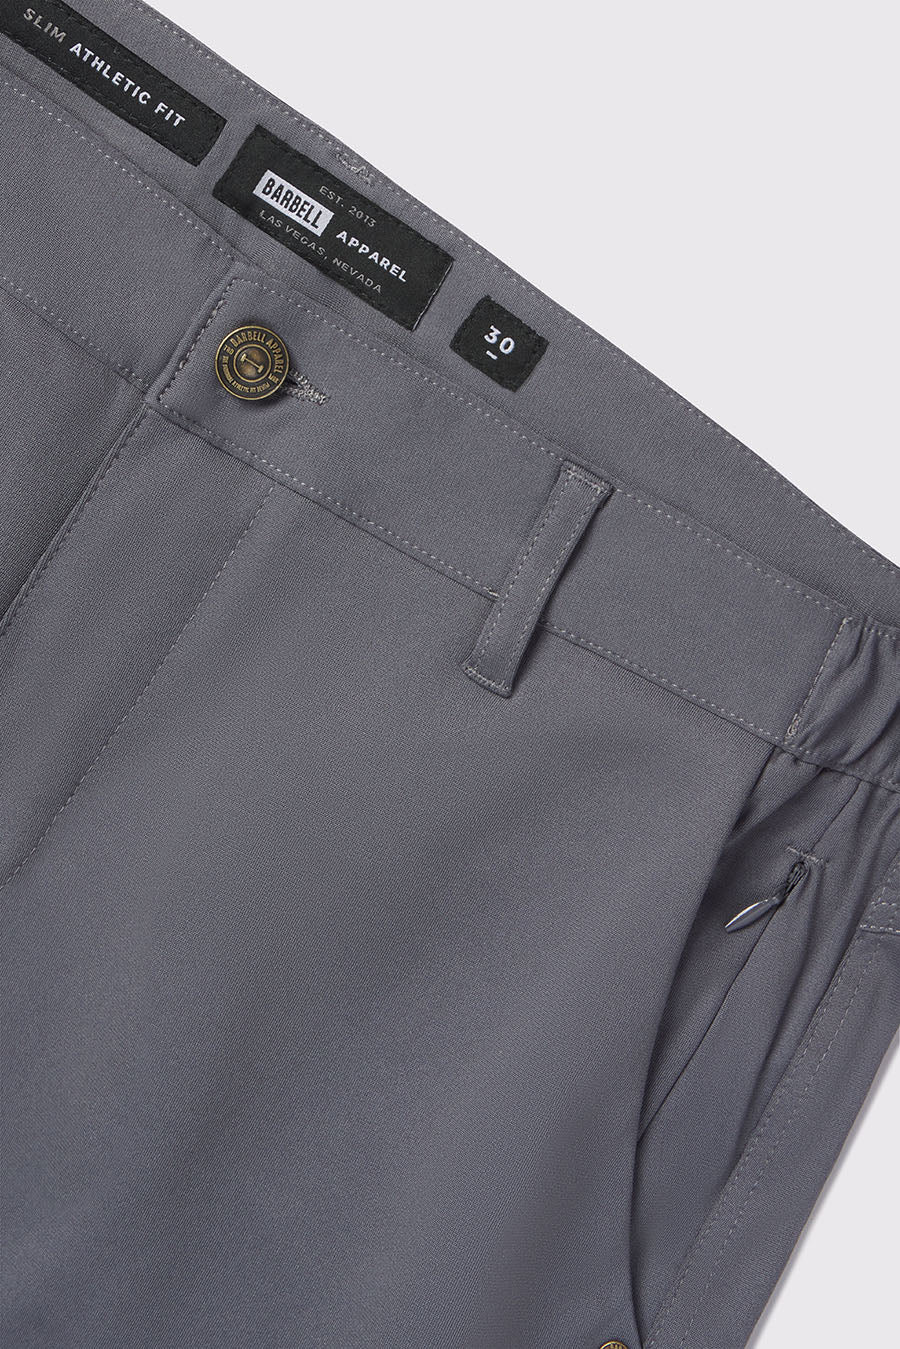 Anything Dress Pant Slim - Slate - photo from detail flat lay #color_slate